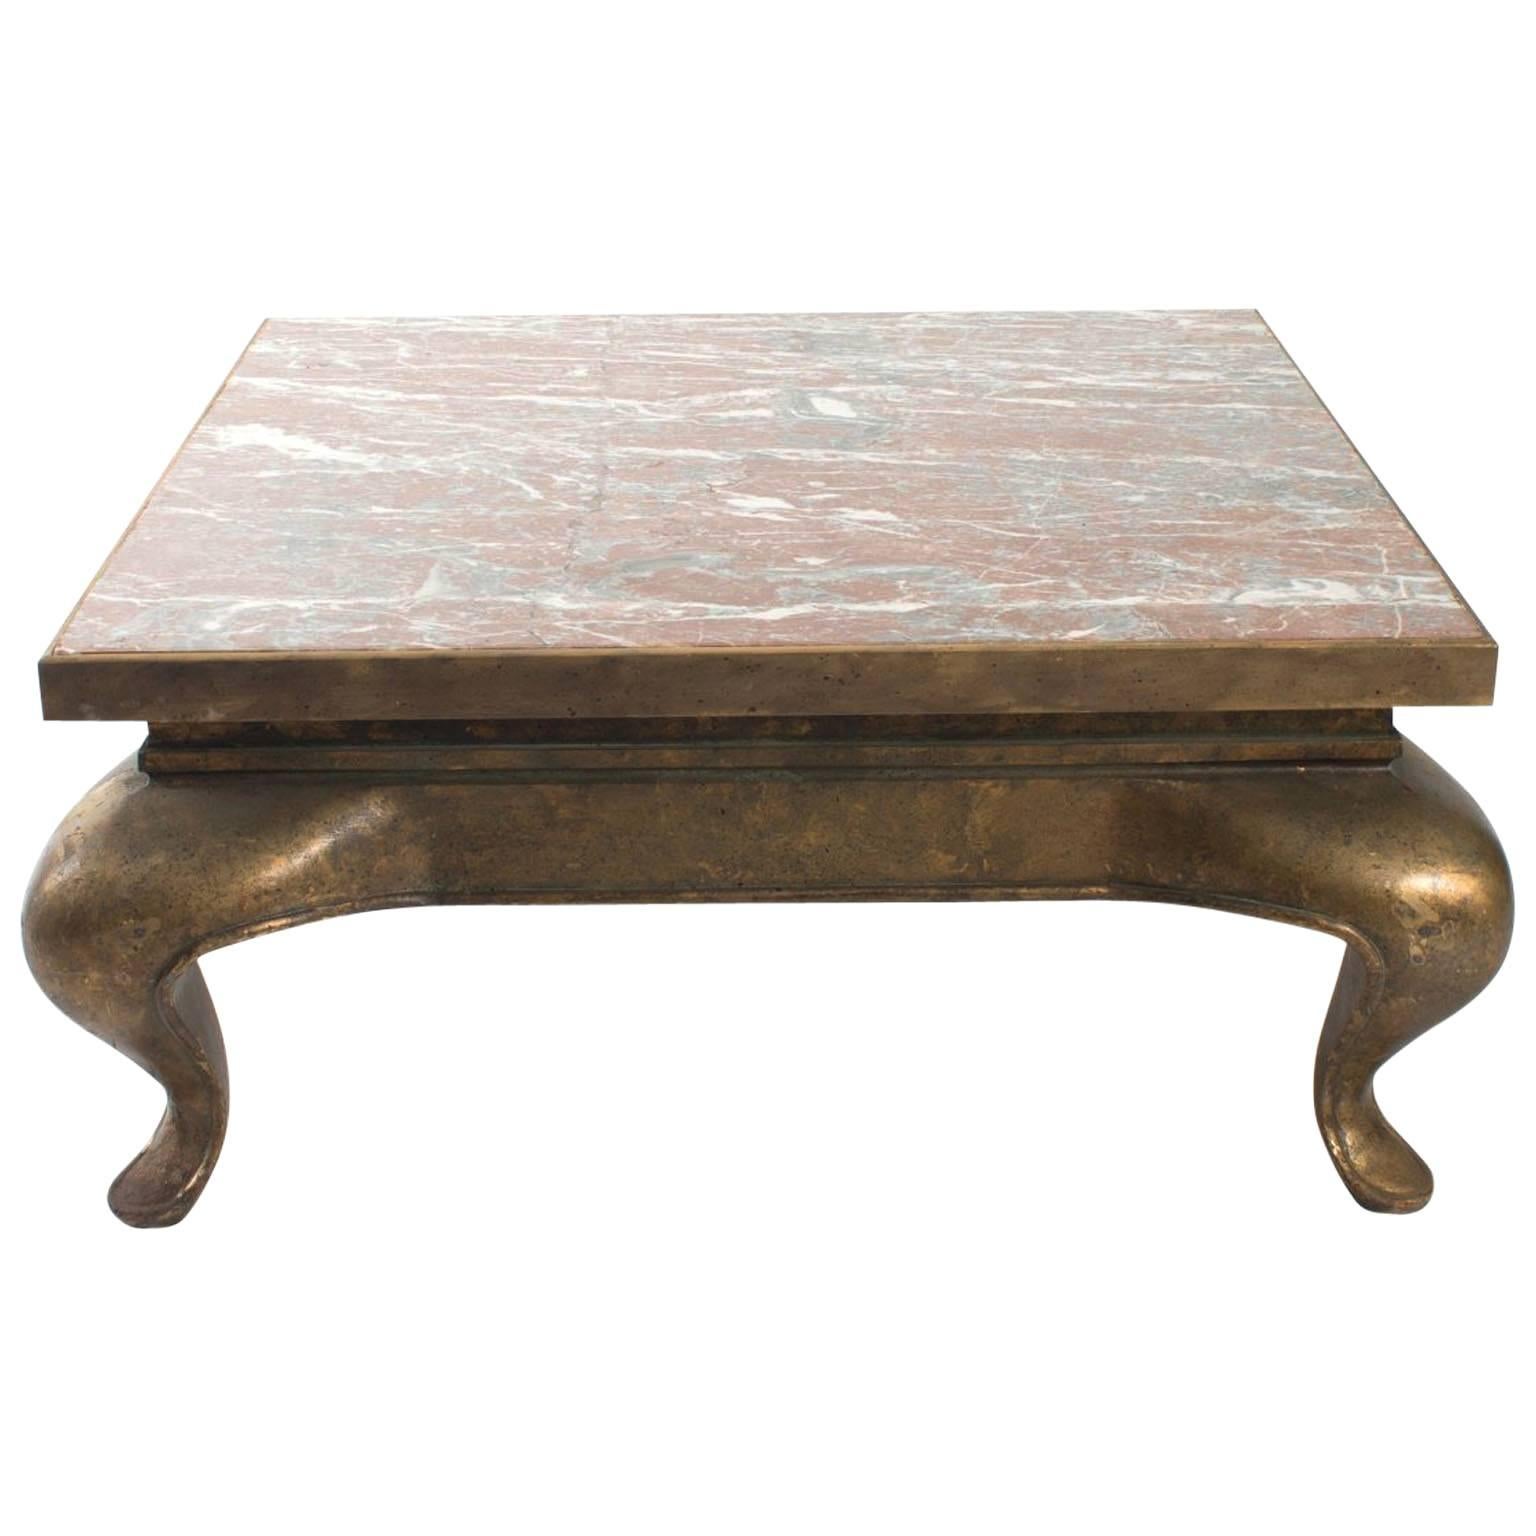 Cabriole Leg Coffee Table For Sale